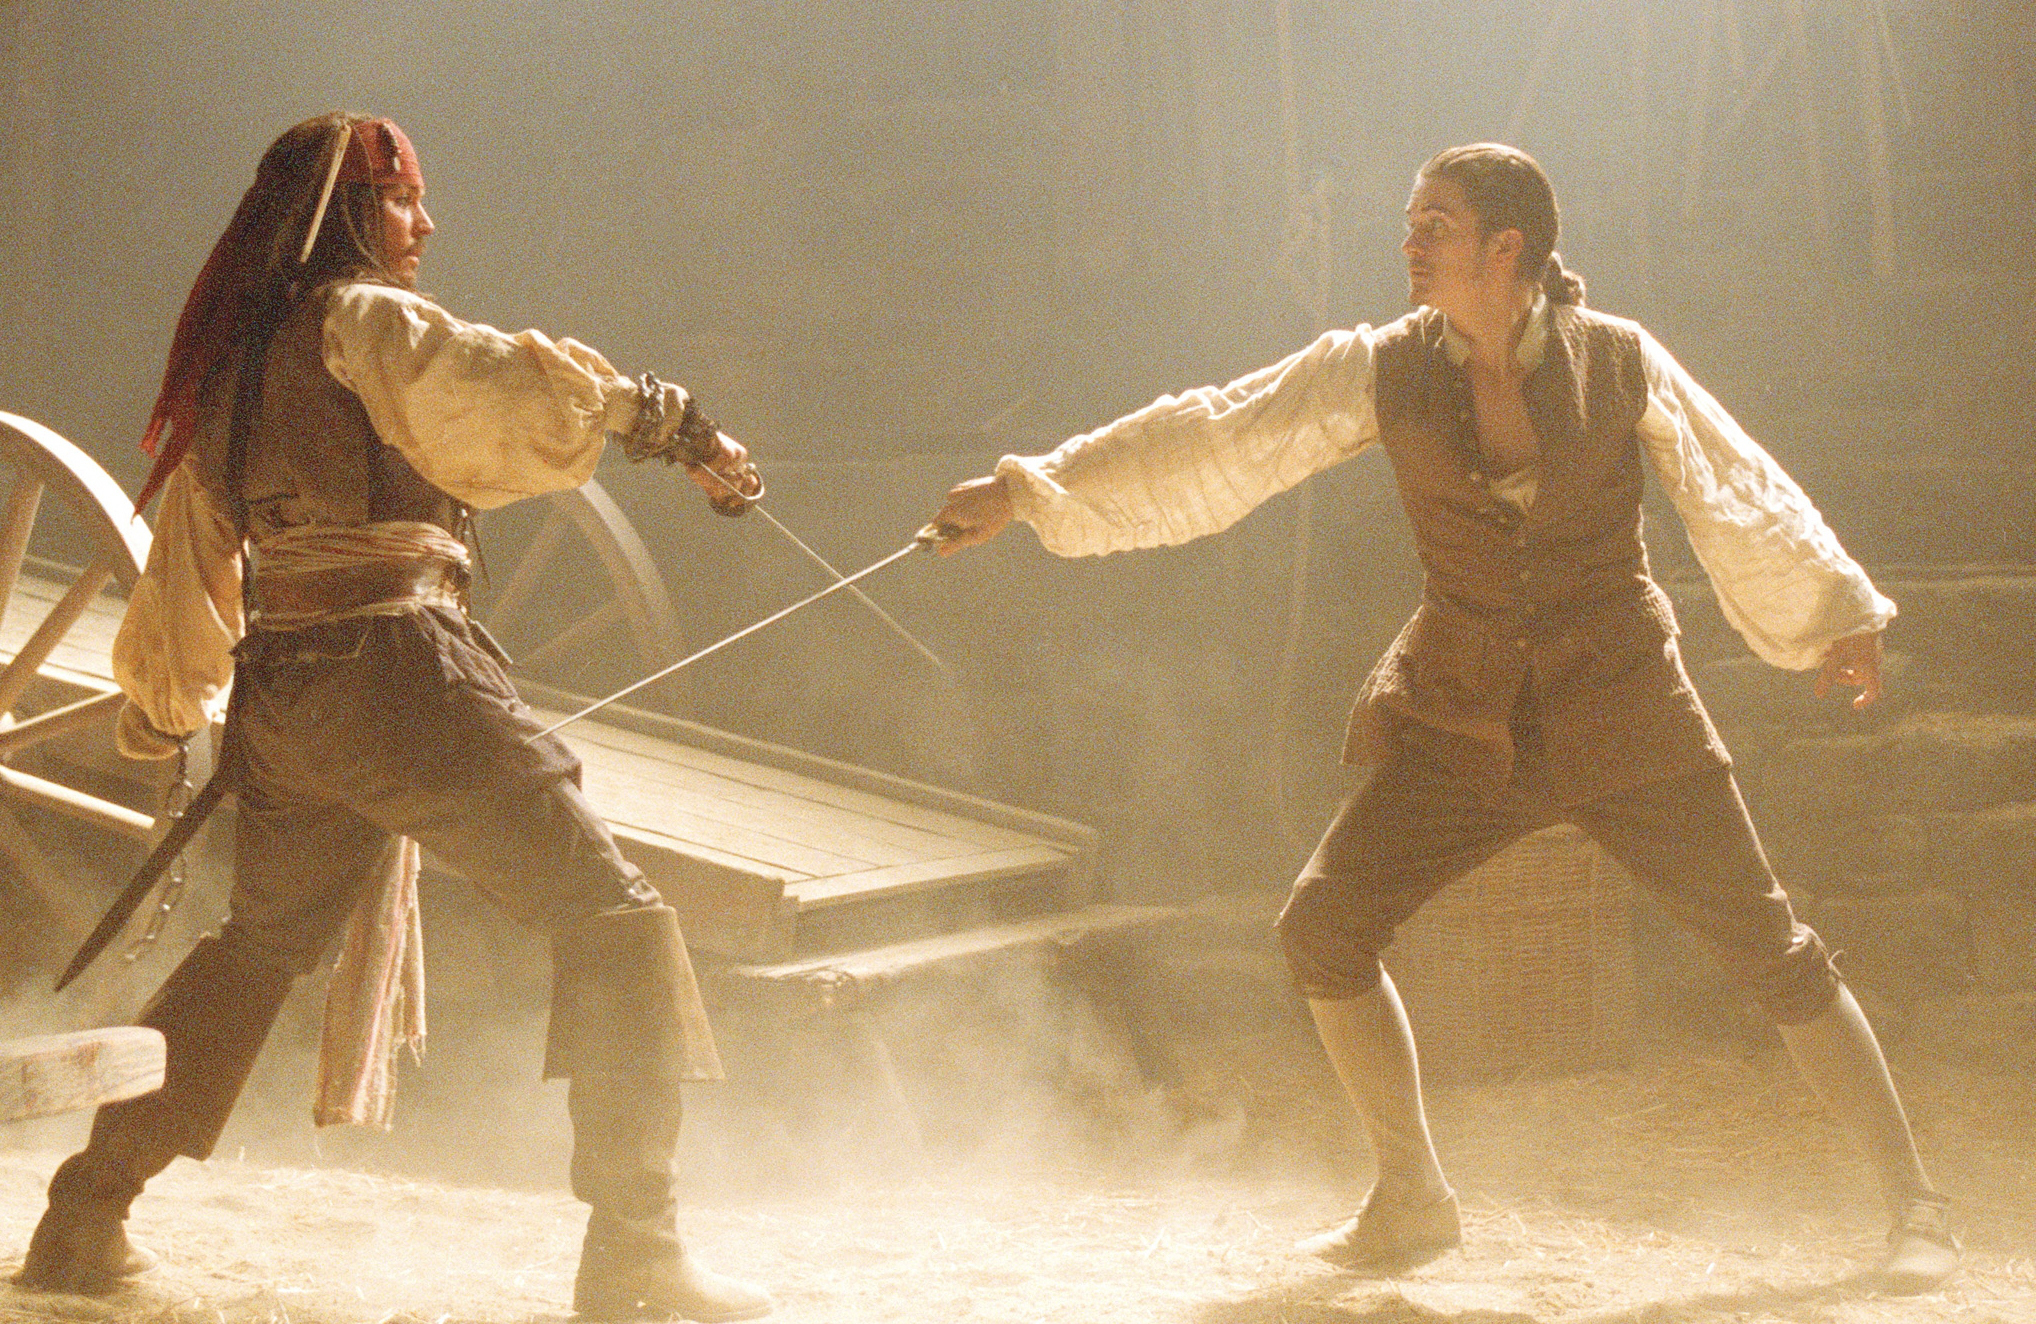 jack sparrow, movie, pirates of the caribbean: the curse of the black pearl, johnny depp, orlando bloom, will turner, pirates of the caribbean